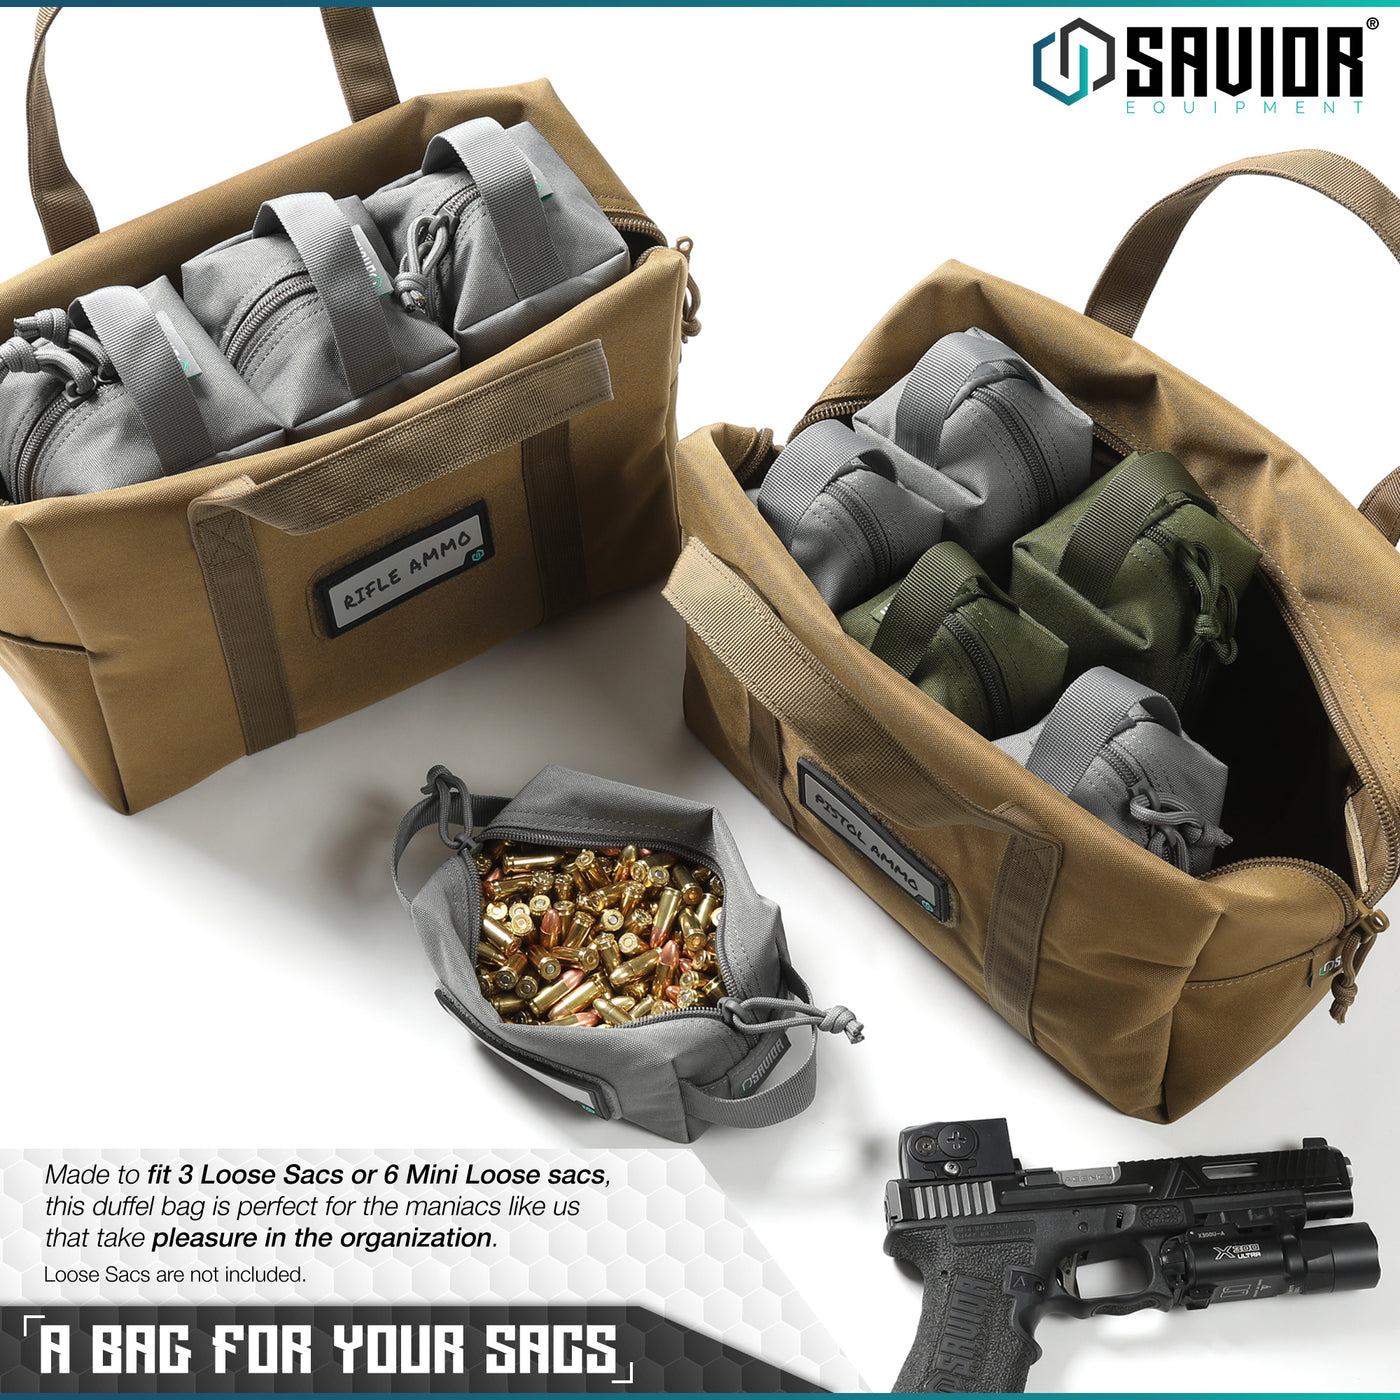 A Bag For Your Sacs - Made to fit 3 Loose Sacs or 6 Mini Loose sacs, this duffel bag is perfect for the maniacs like us that take pleasure in the organization. Loose Sacs are not included.